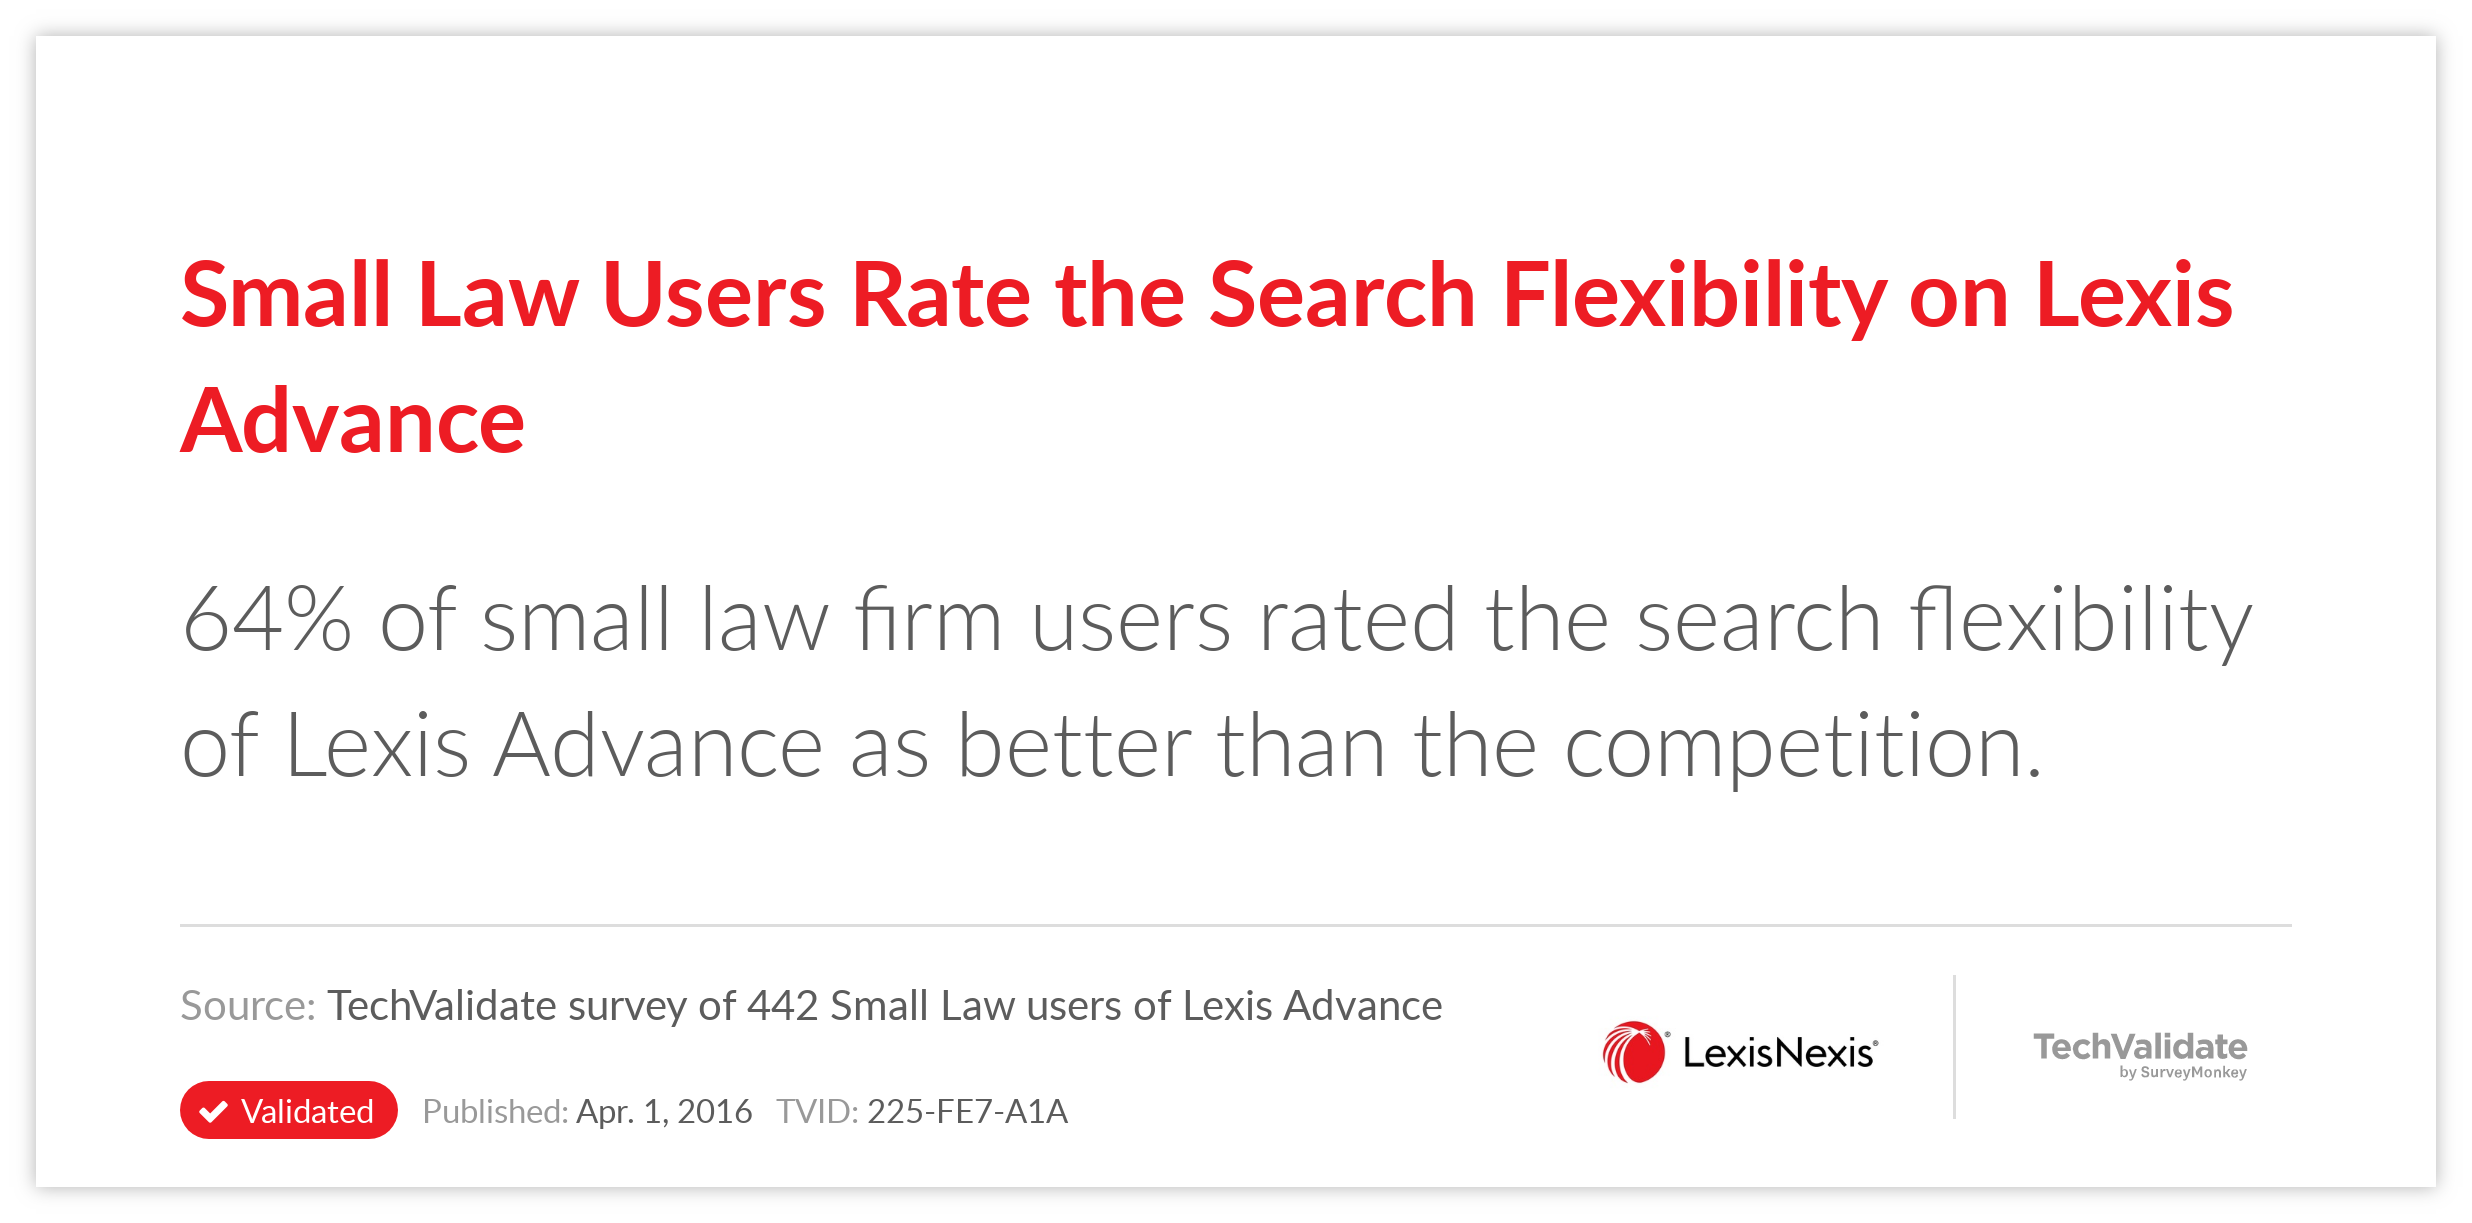 Small Law Users Rate the Search Flexibility on Lexis Advance